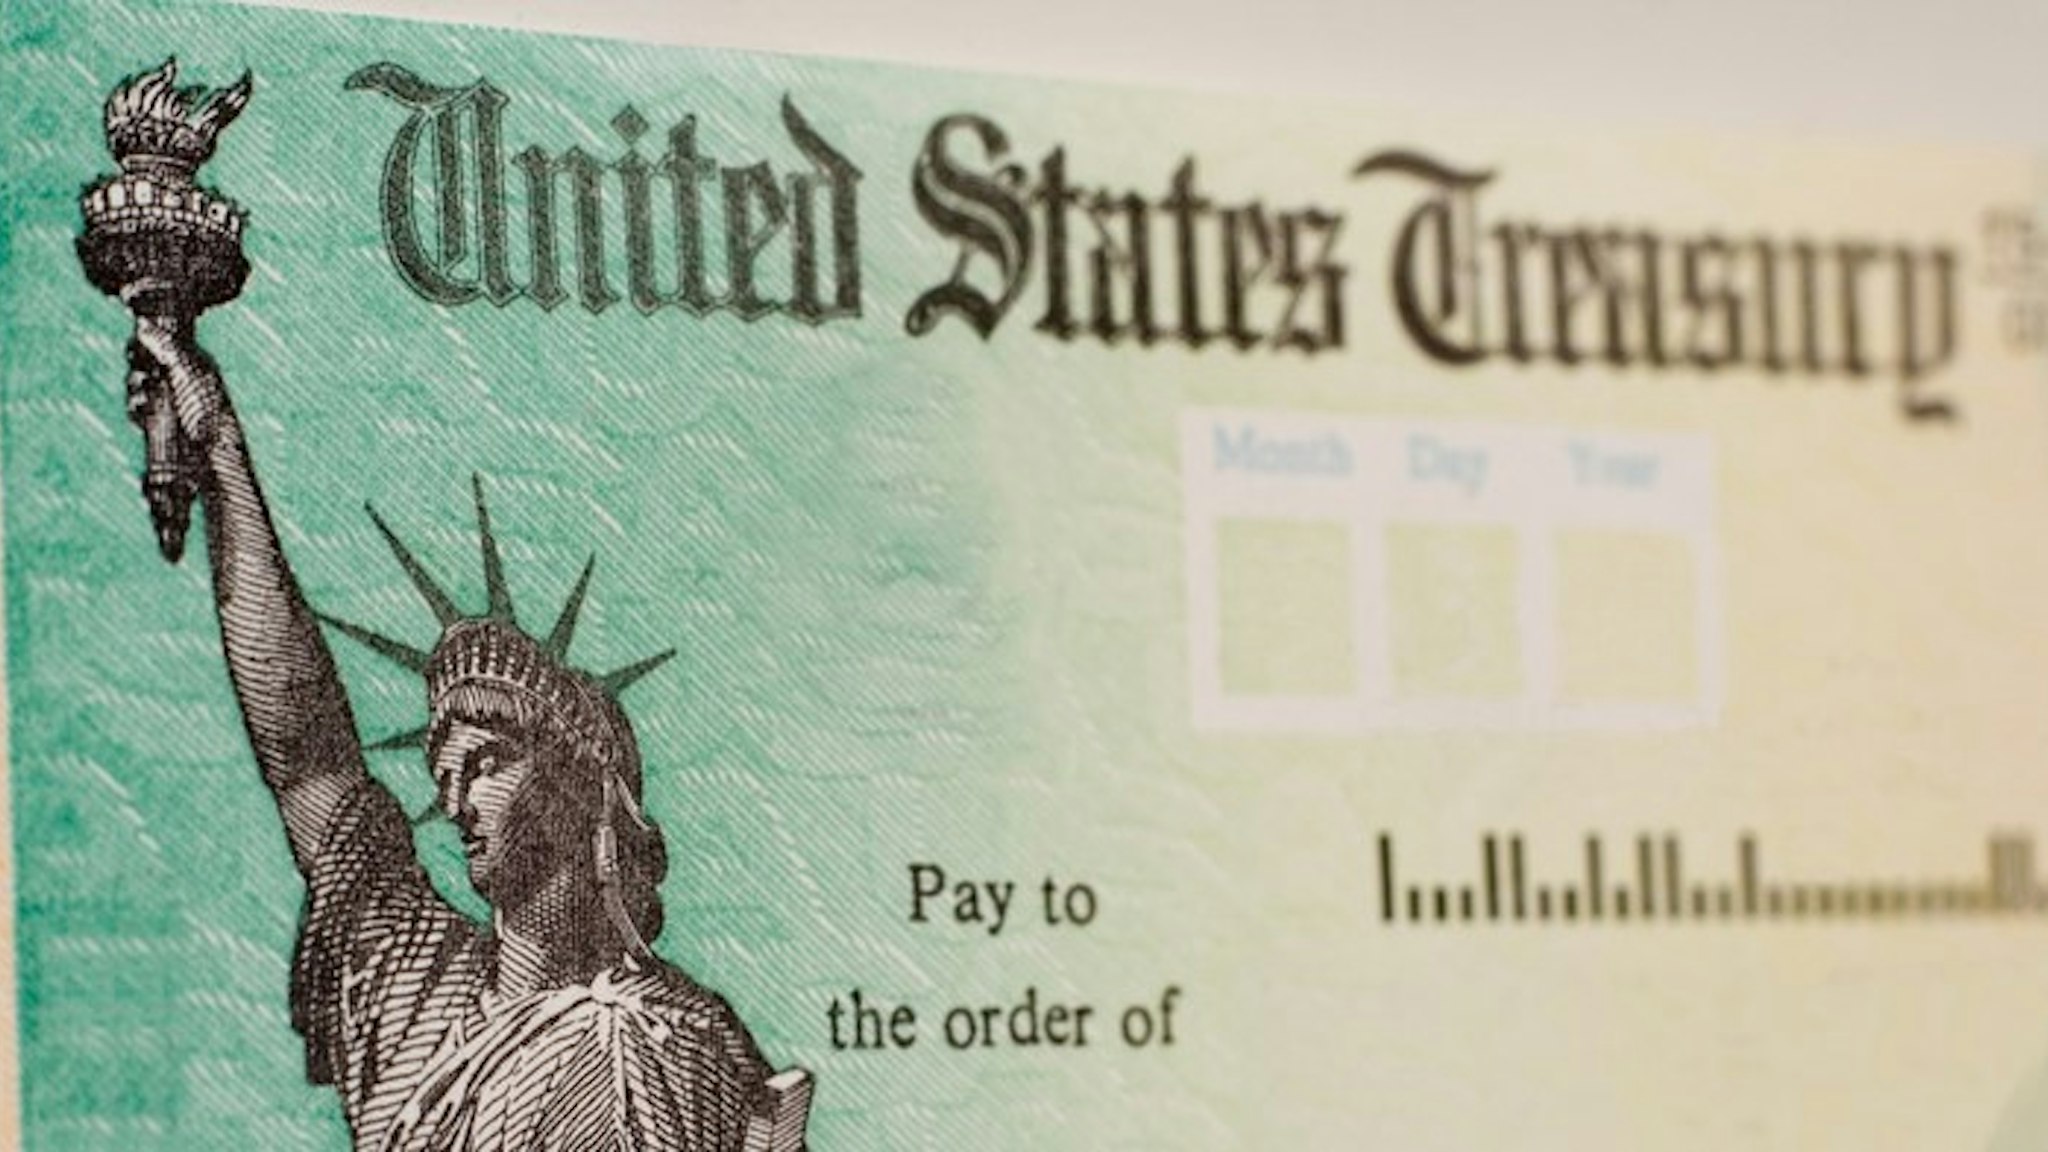 A blank US government check with selective focus on the statue of liberty